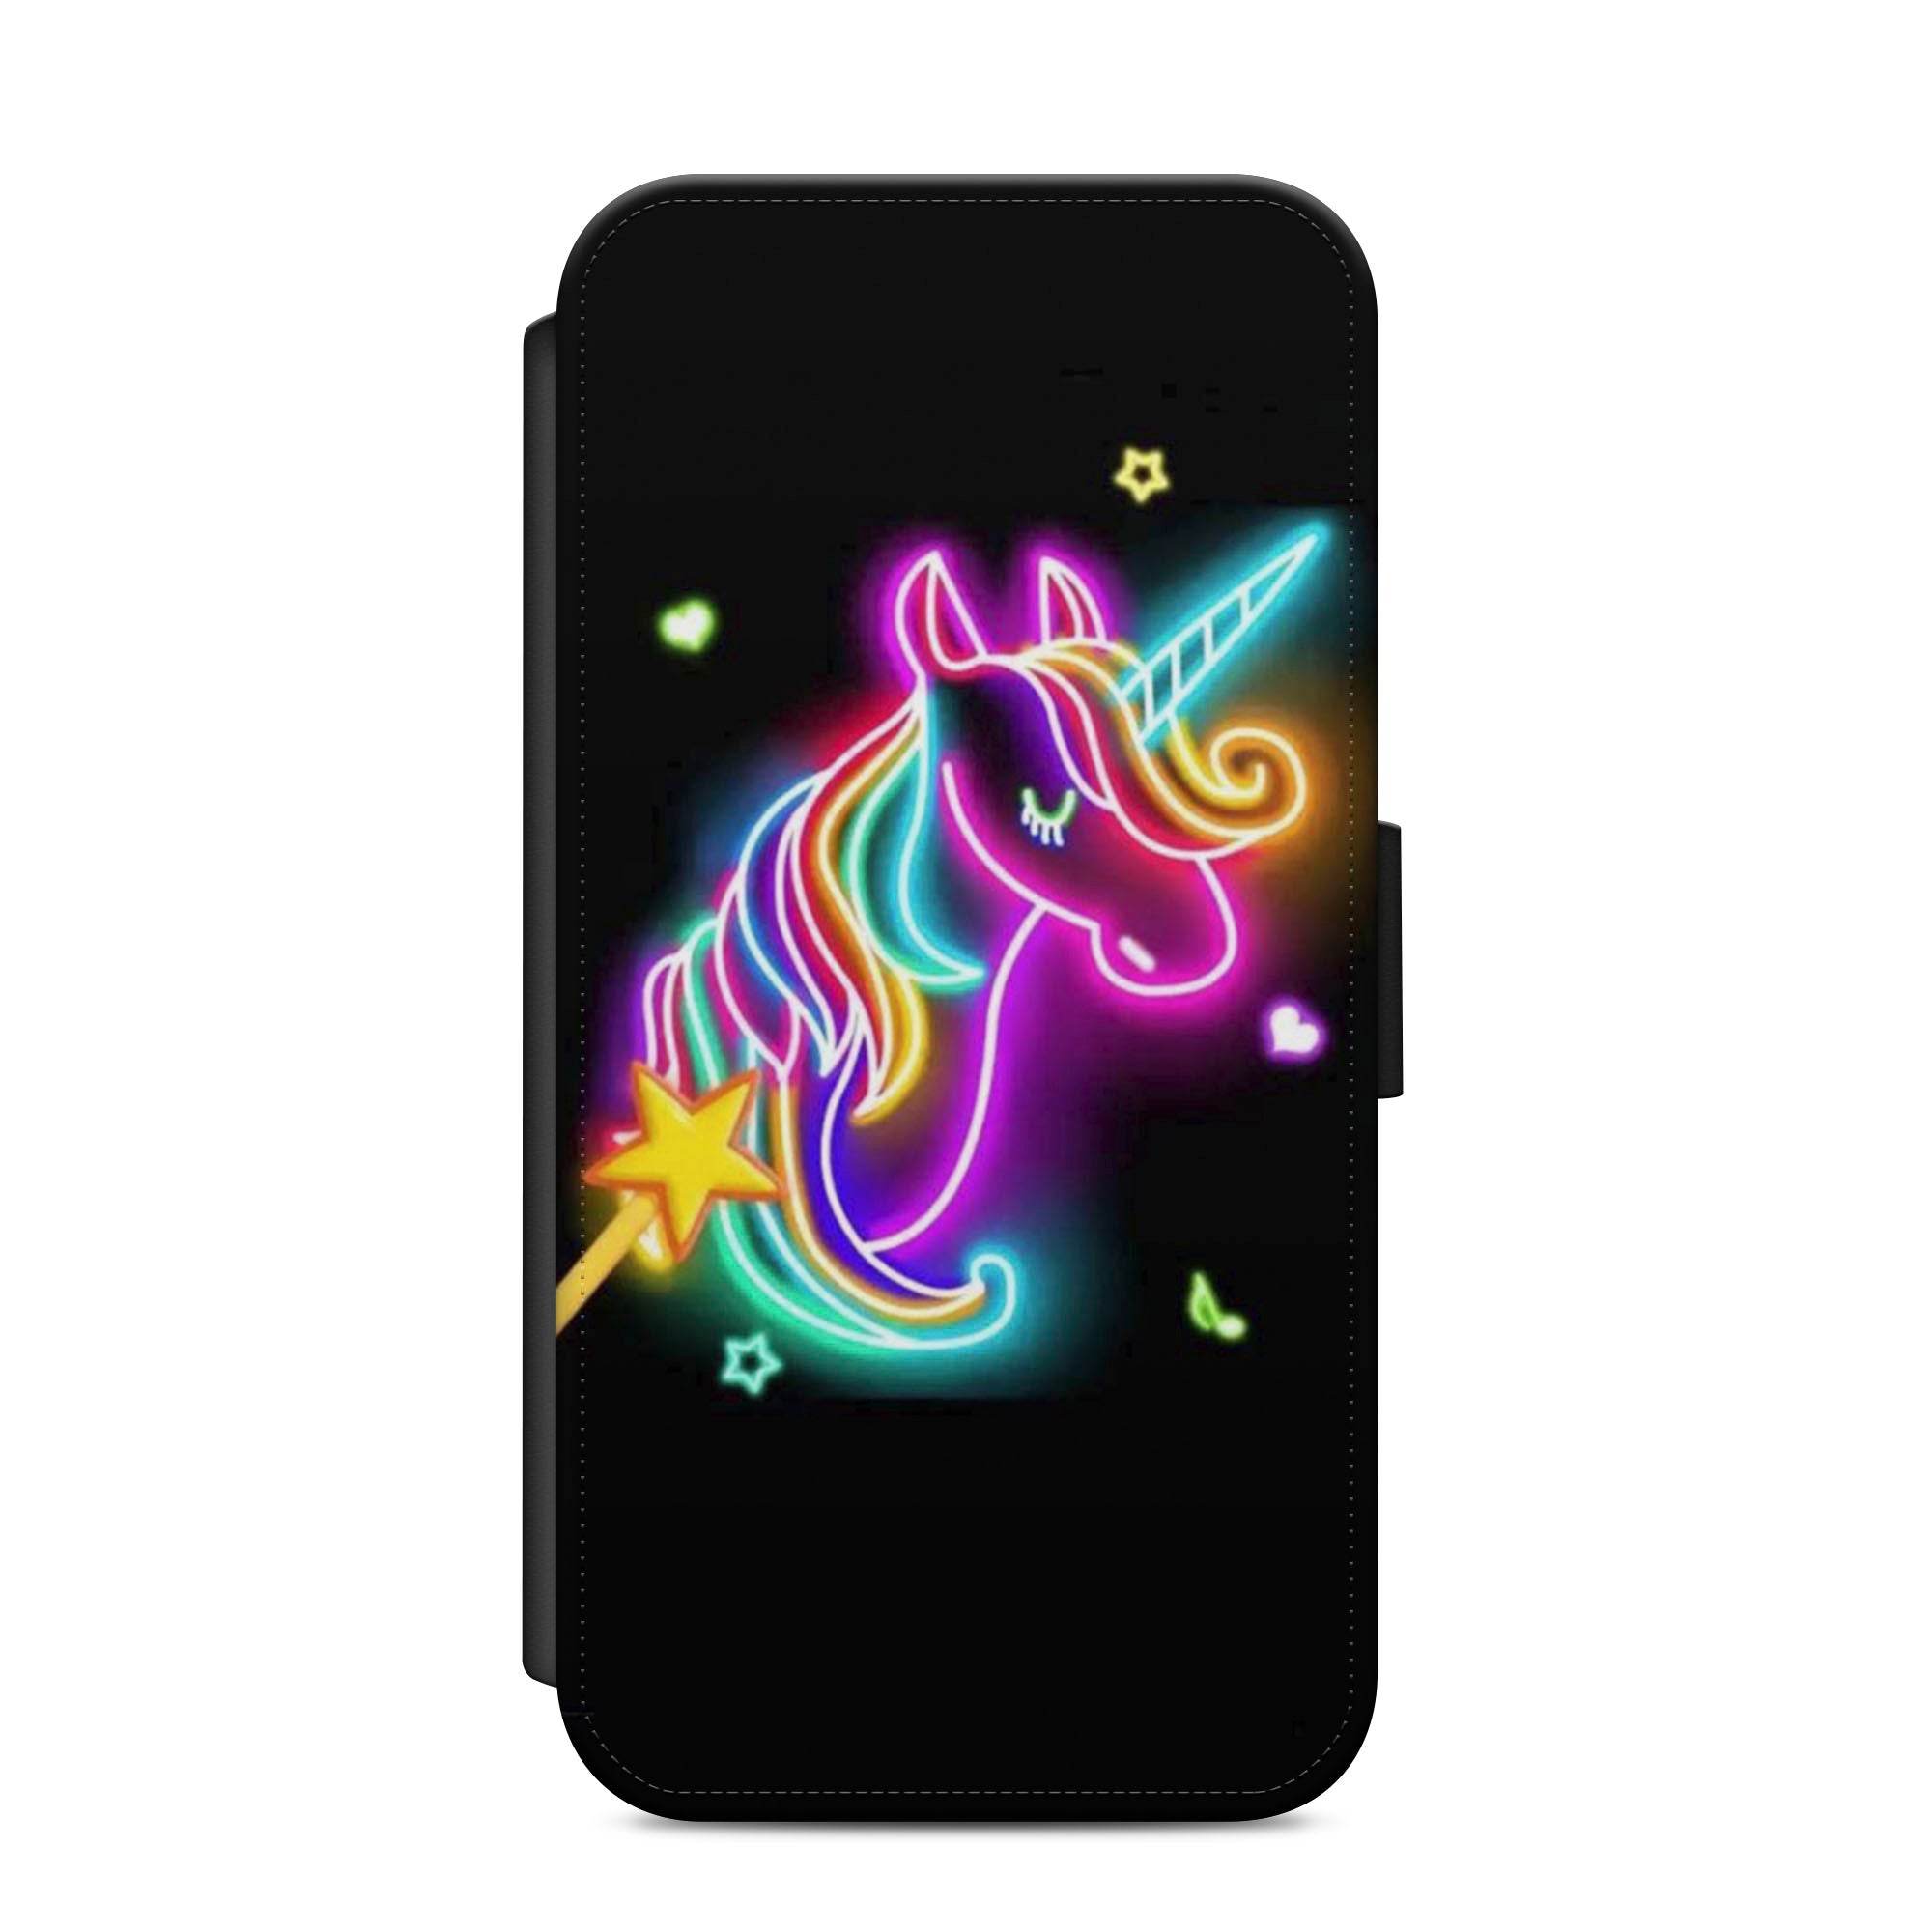 Neon Unicorn Faux Leather Flip Case Wallet for iPhone / Samsung